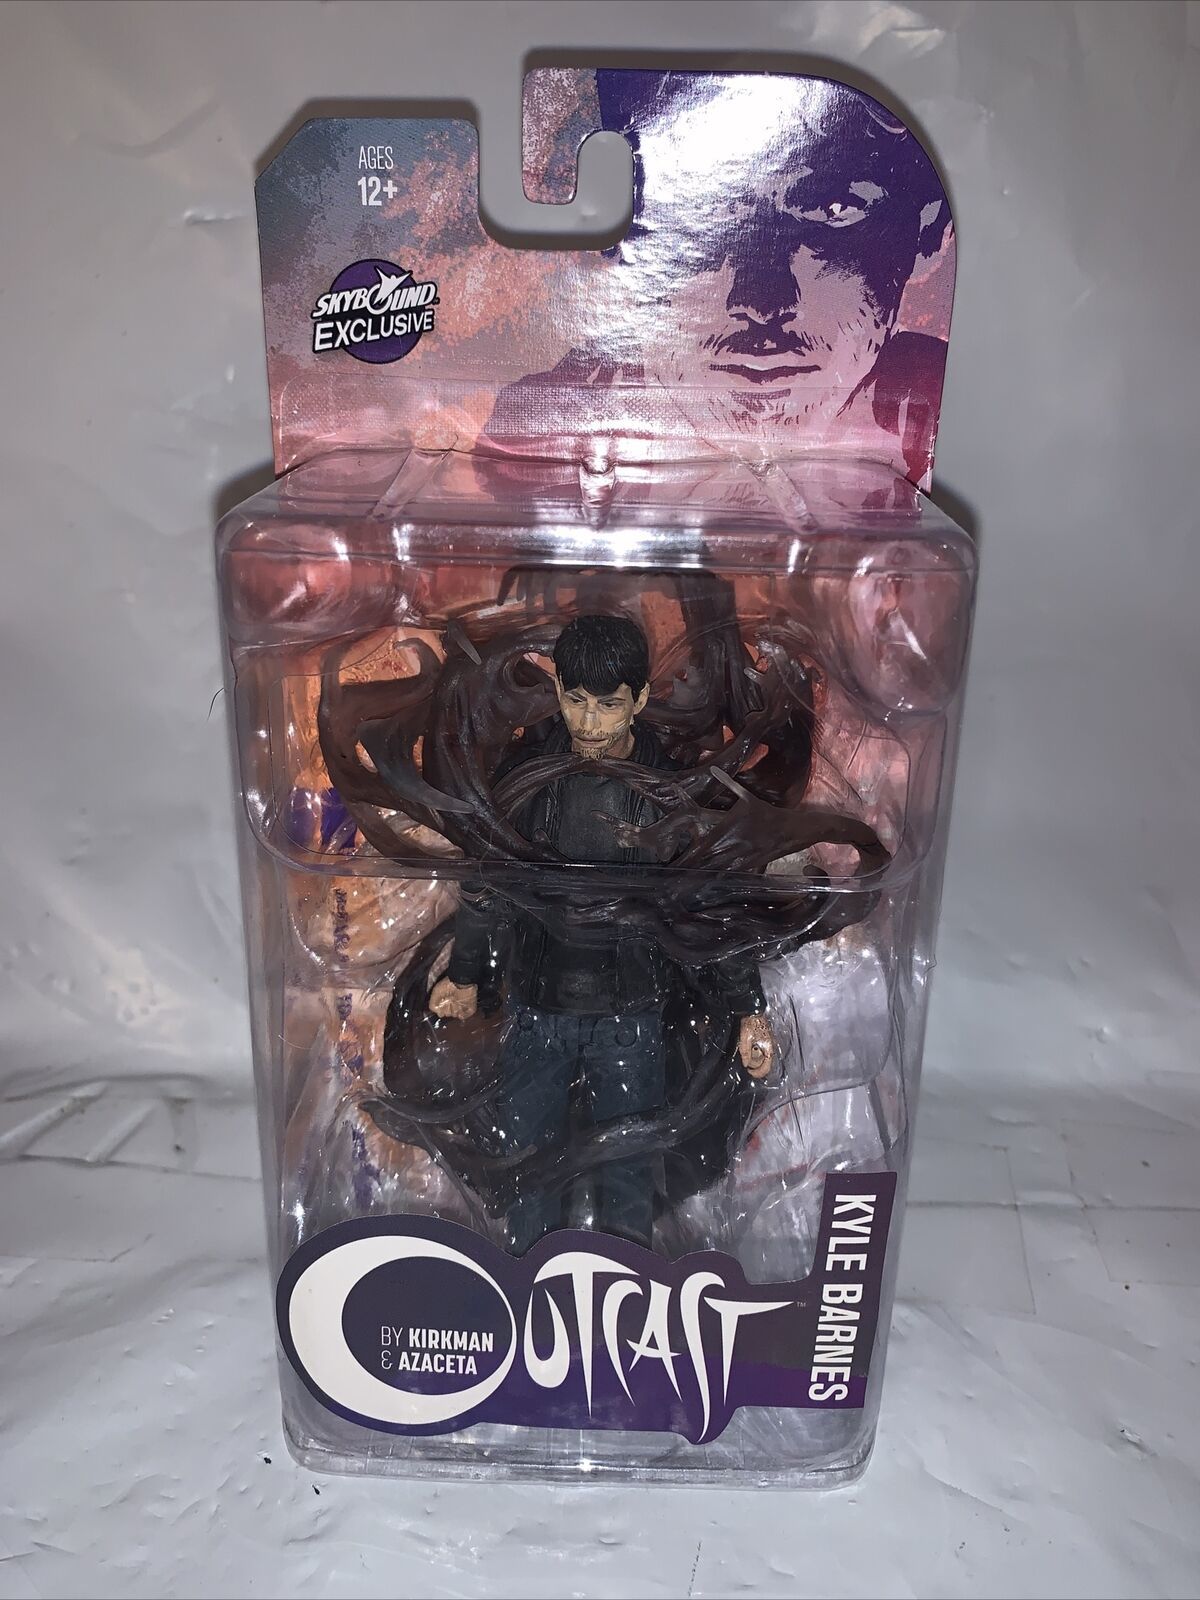 Primary image for McFarlane Toys Skybound Exclusive Outcast Bloody Kyle Barnes Comic Action Figure